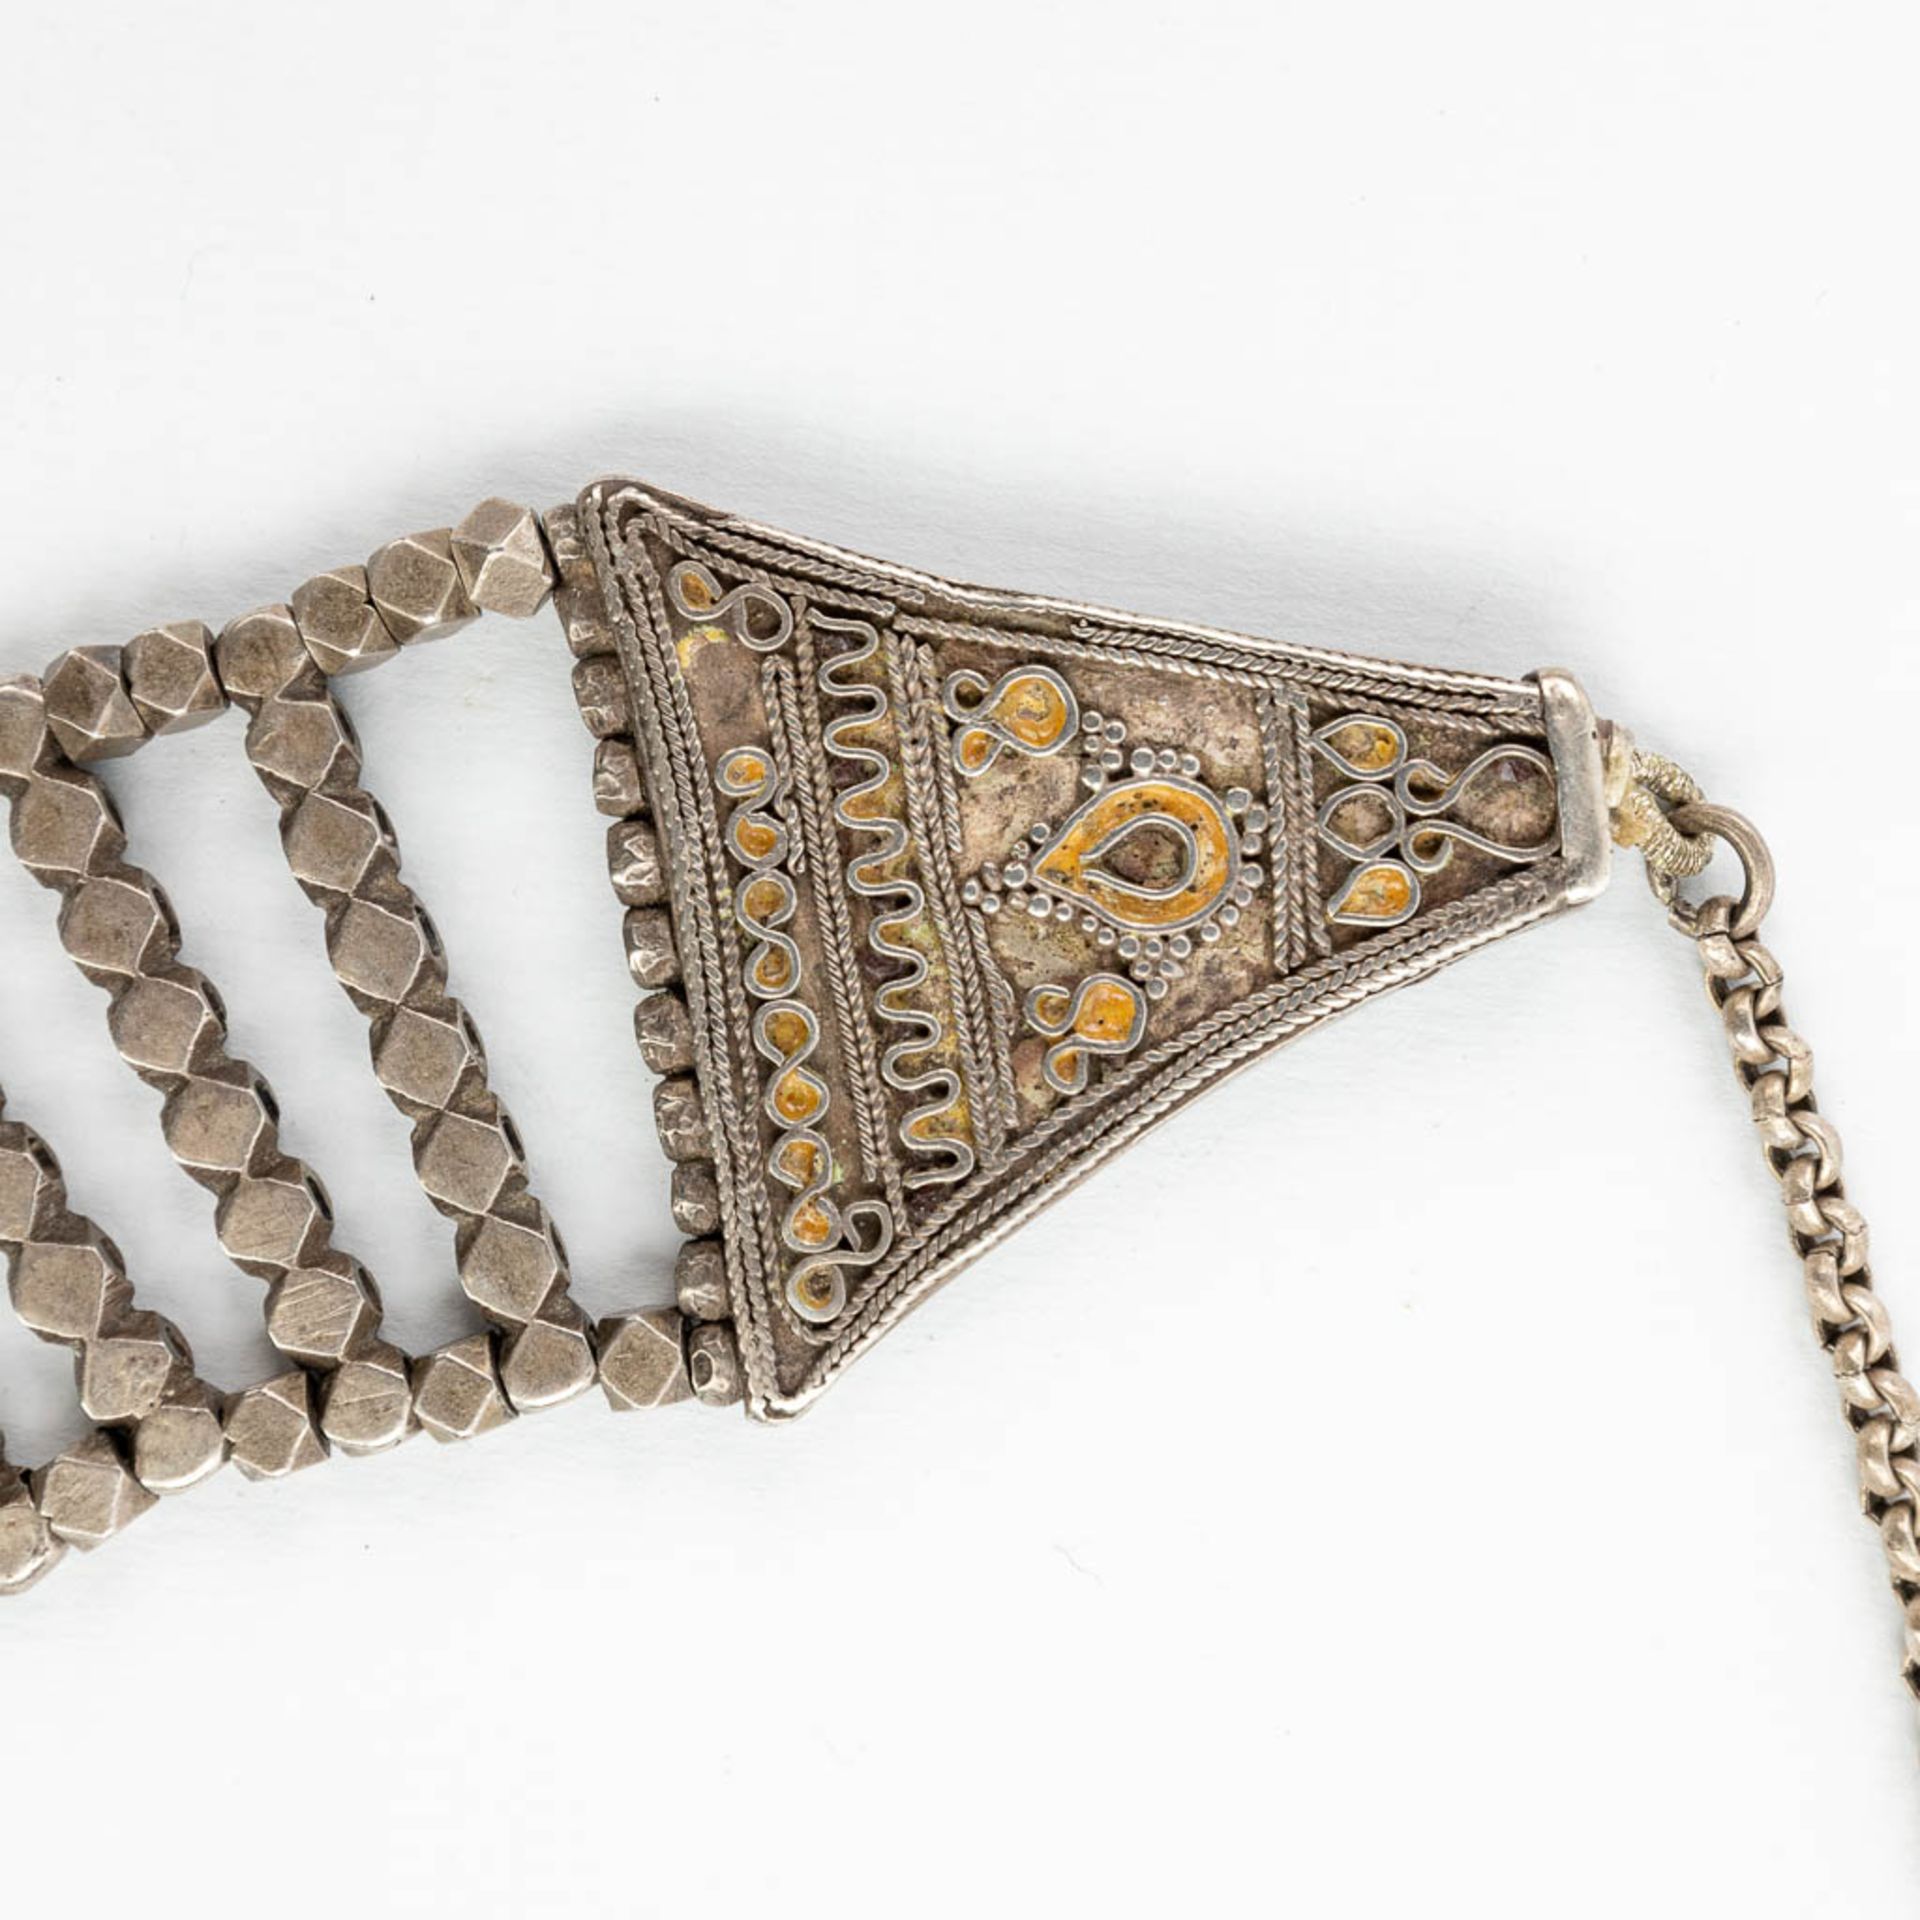 A necklace and belt made of silver in Oriental style. - Image 13 of 14